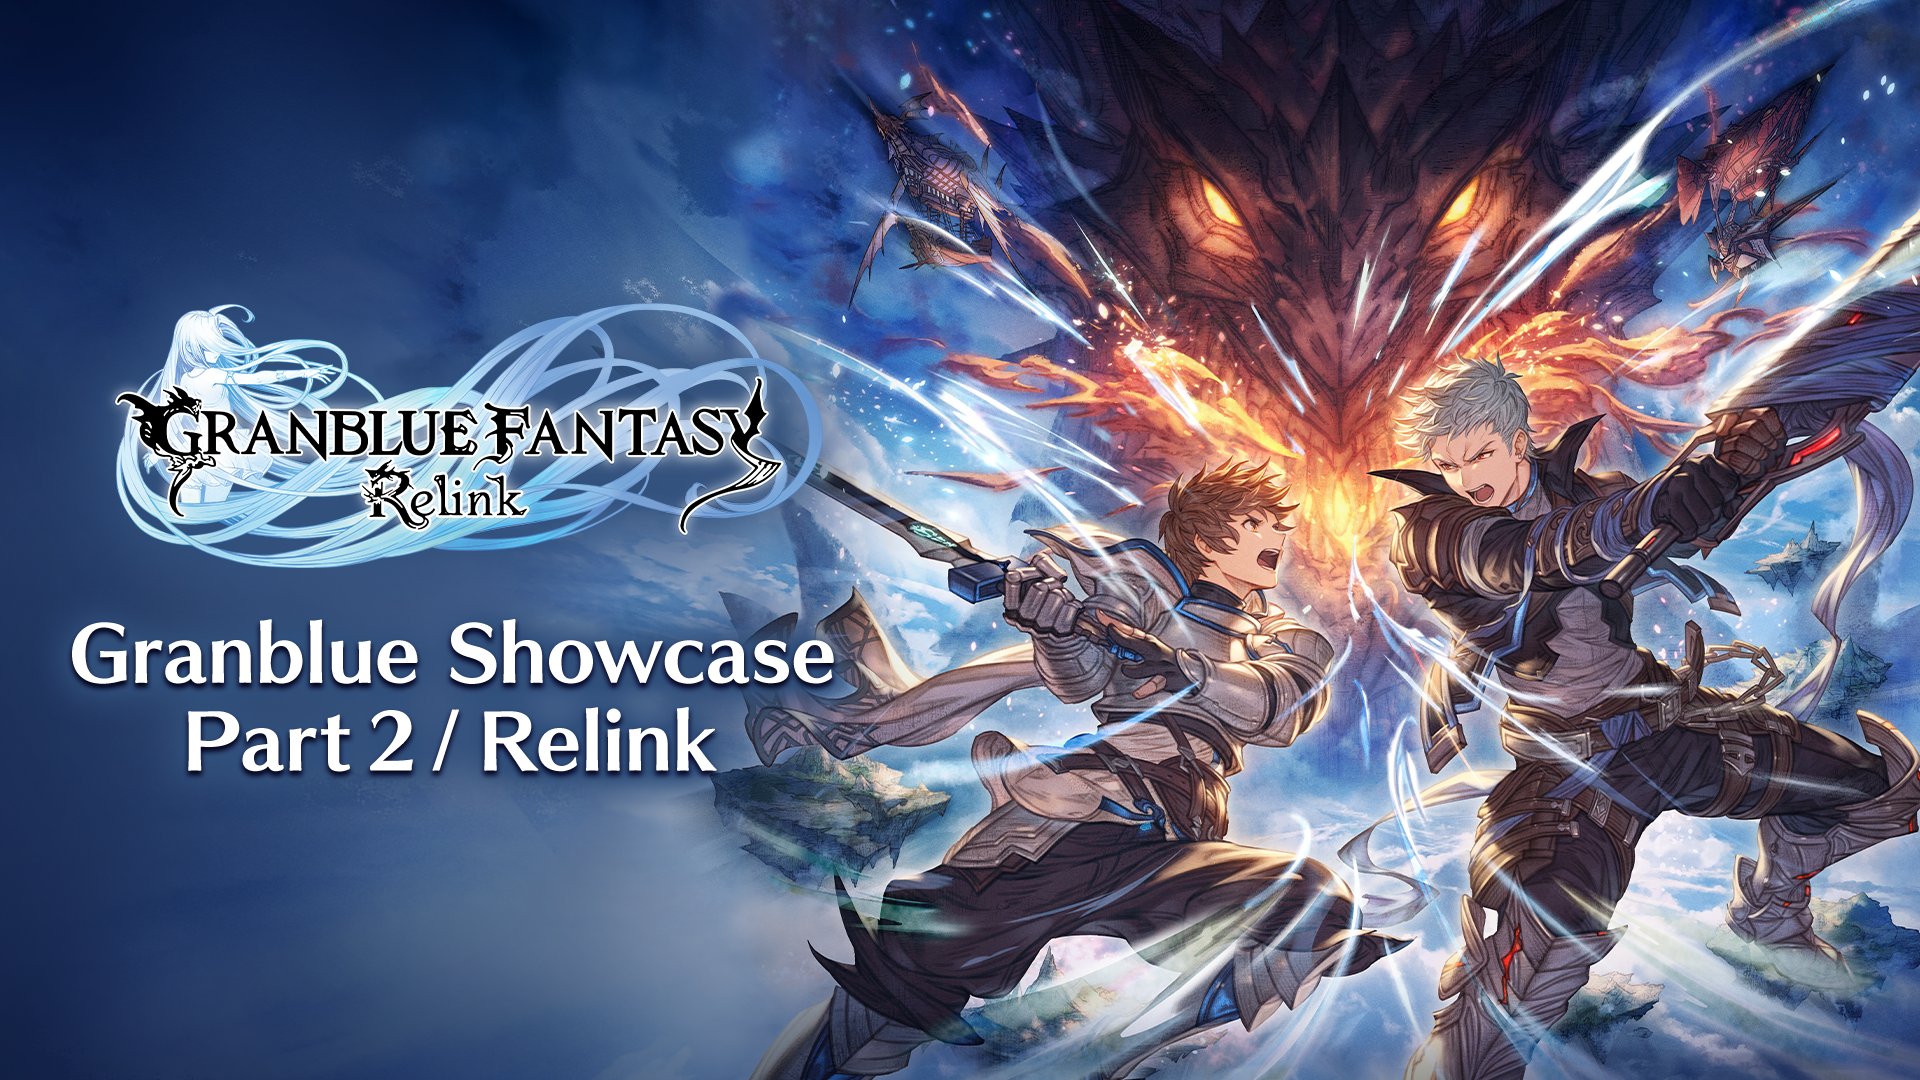 GRANBLUE FANTASY: Relink on X: Join us for Granblue Showcase: Part 2 – # Relink! The stream premieres tonight on  at 2 a.m. (PT)! ✨ 📺  Stream:  We'll be showing off